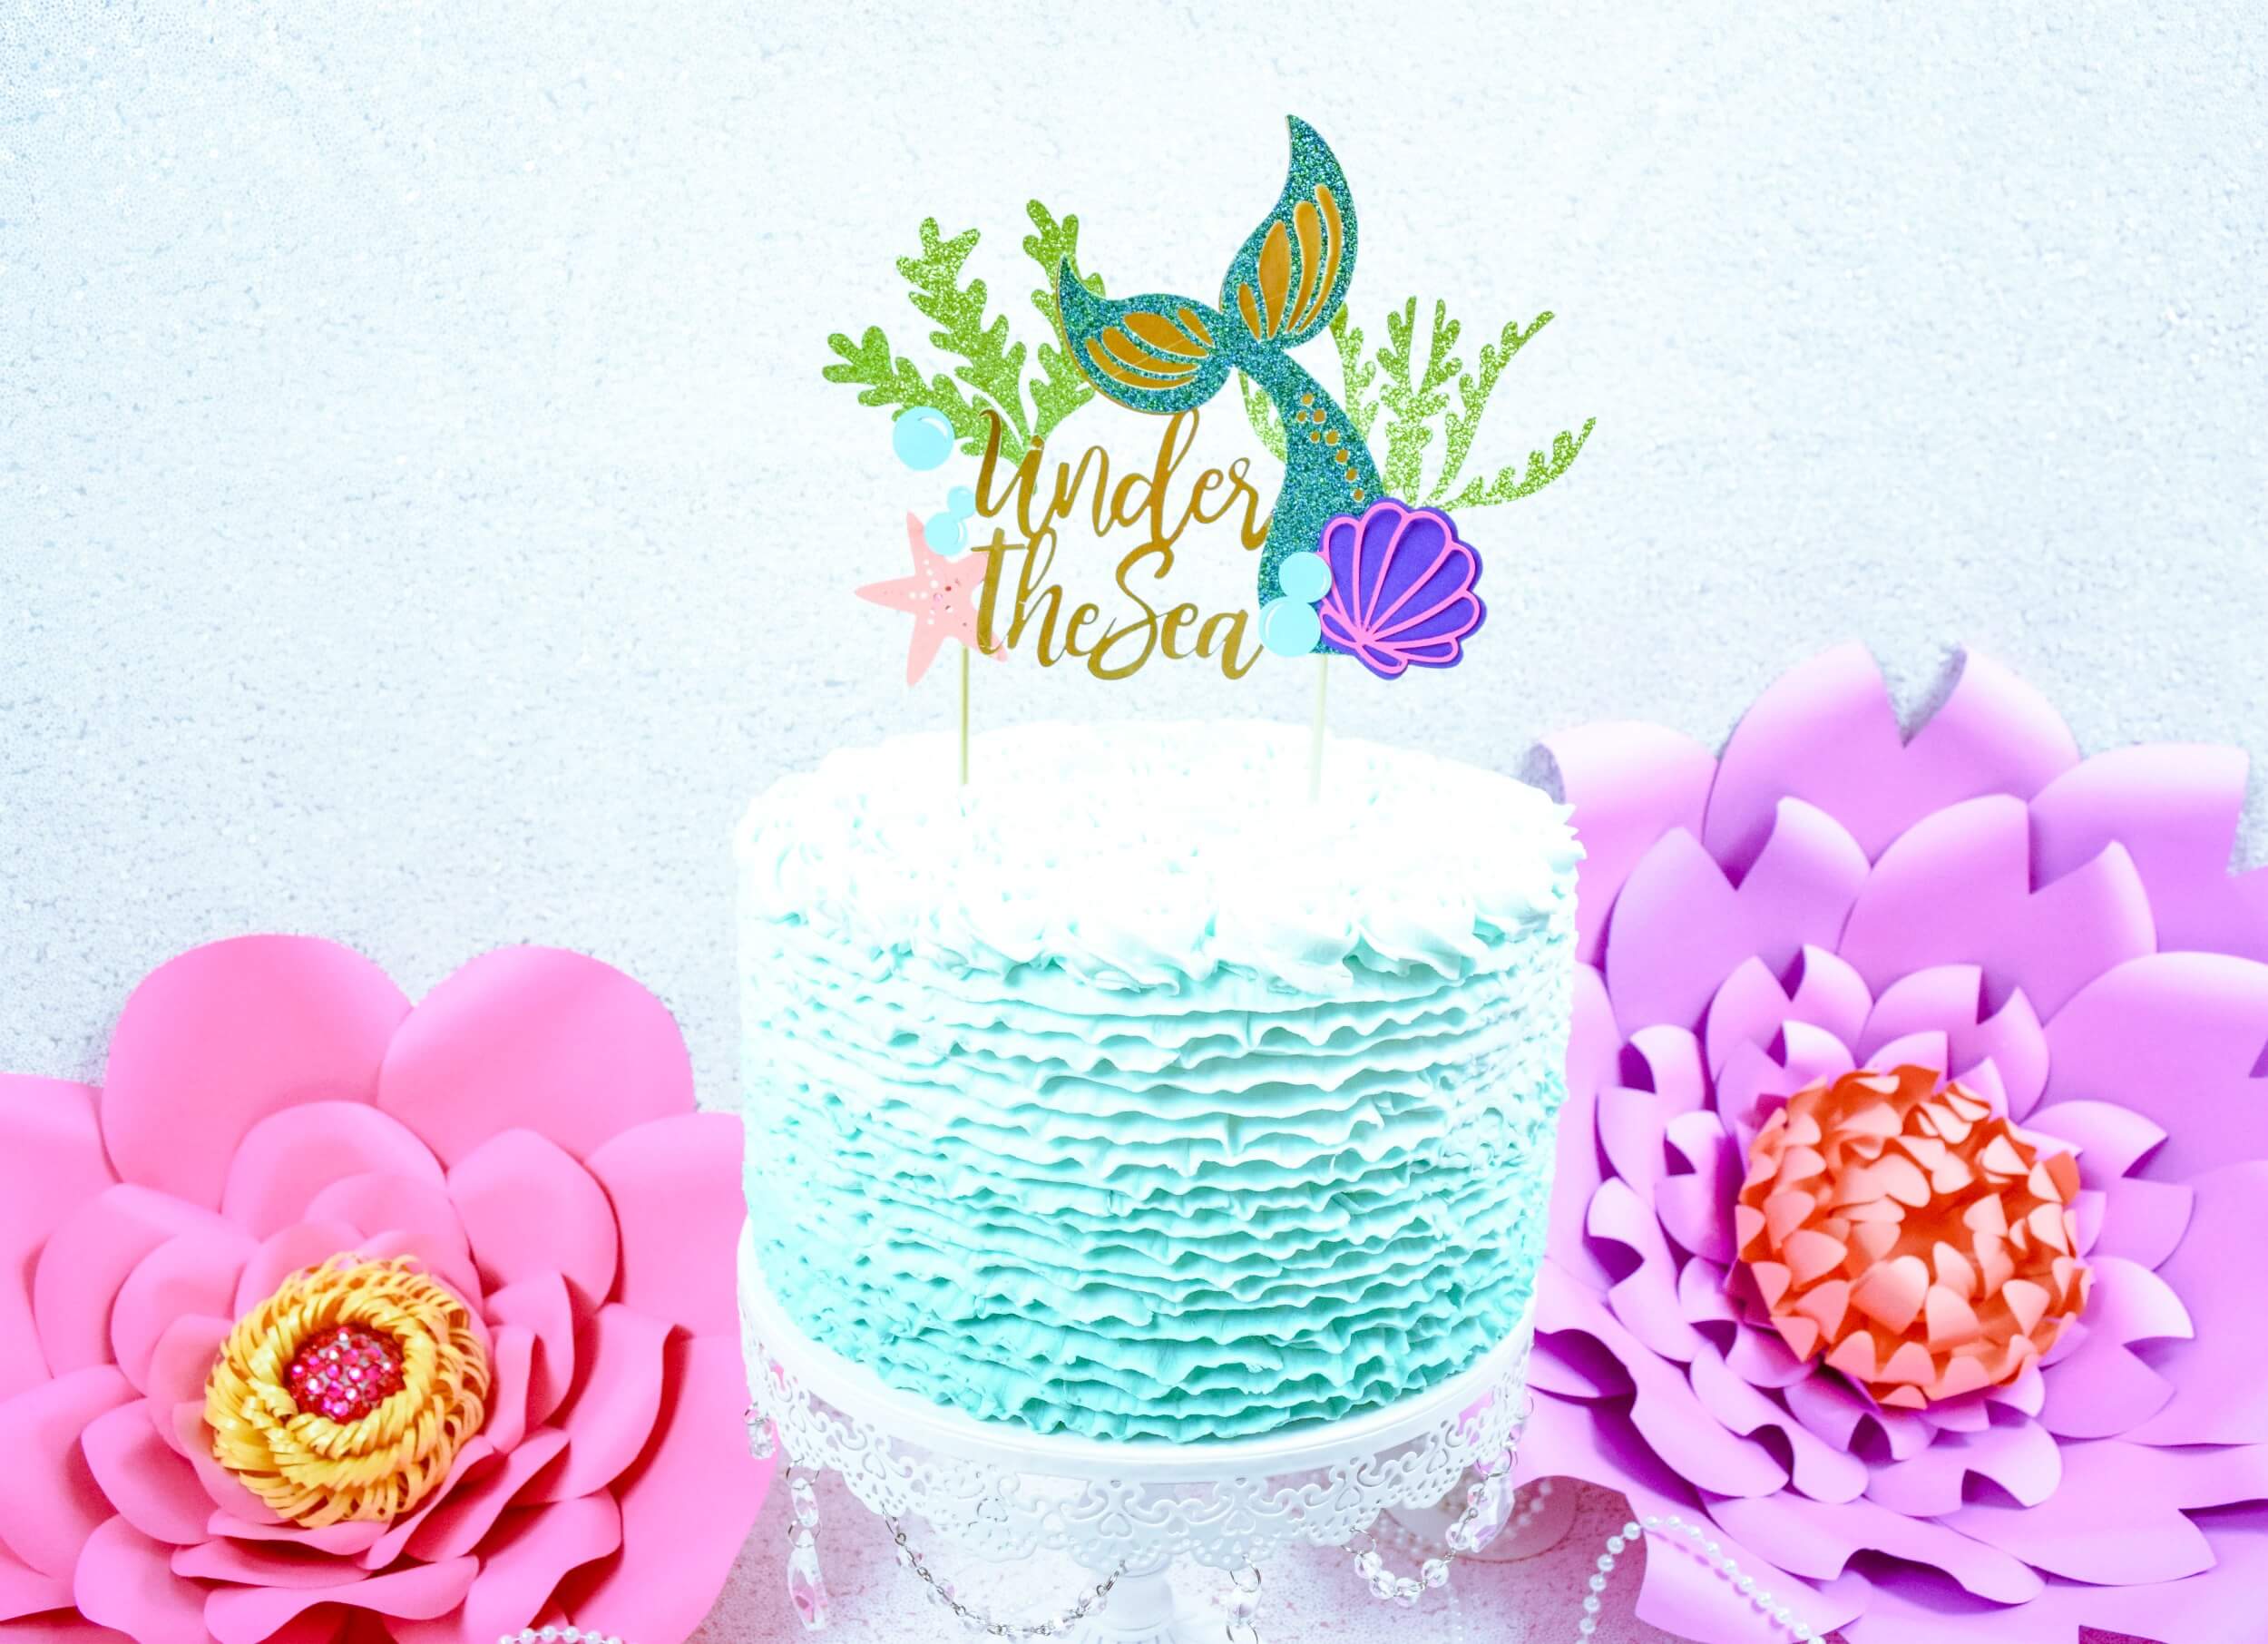 A small round frosted birthday cake sits on a cake stand between two large pink and purple paper flowers. The cake is frosted with a light ombre-blue frosting and topped with a DIY mermaid-themed cake topper that says “under the sea” in gold letters.